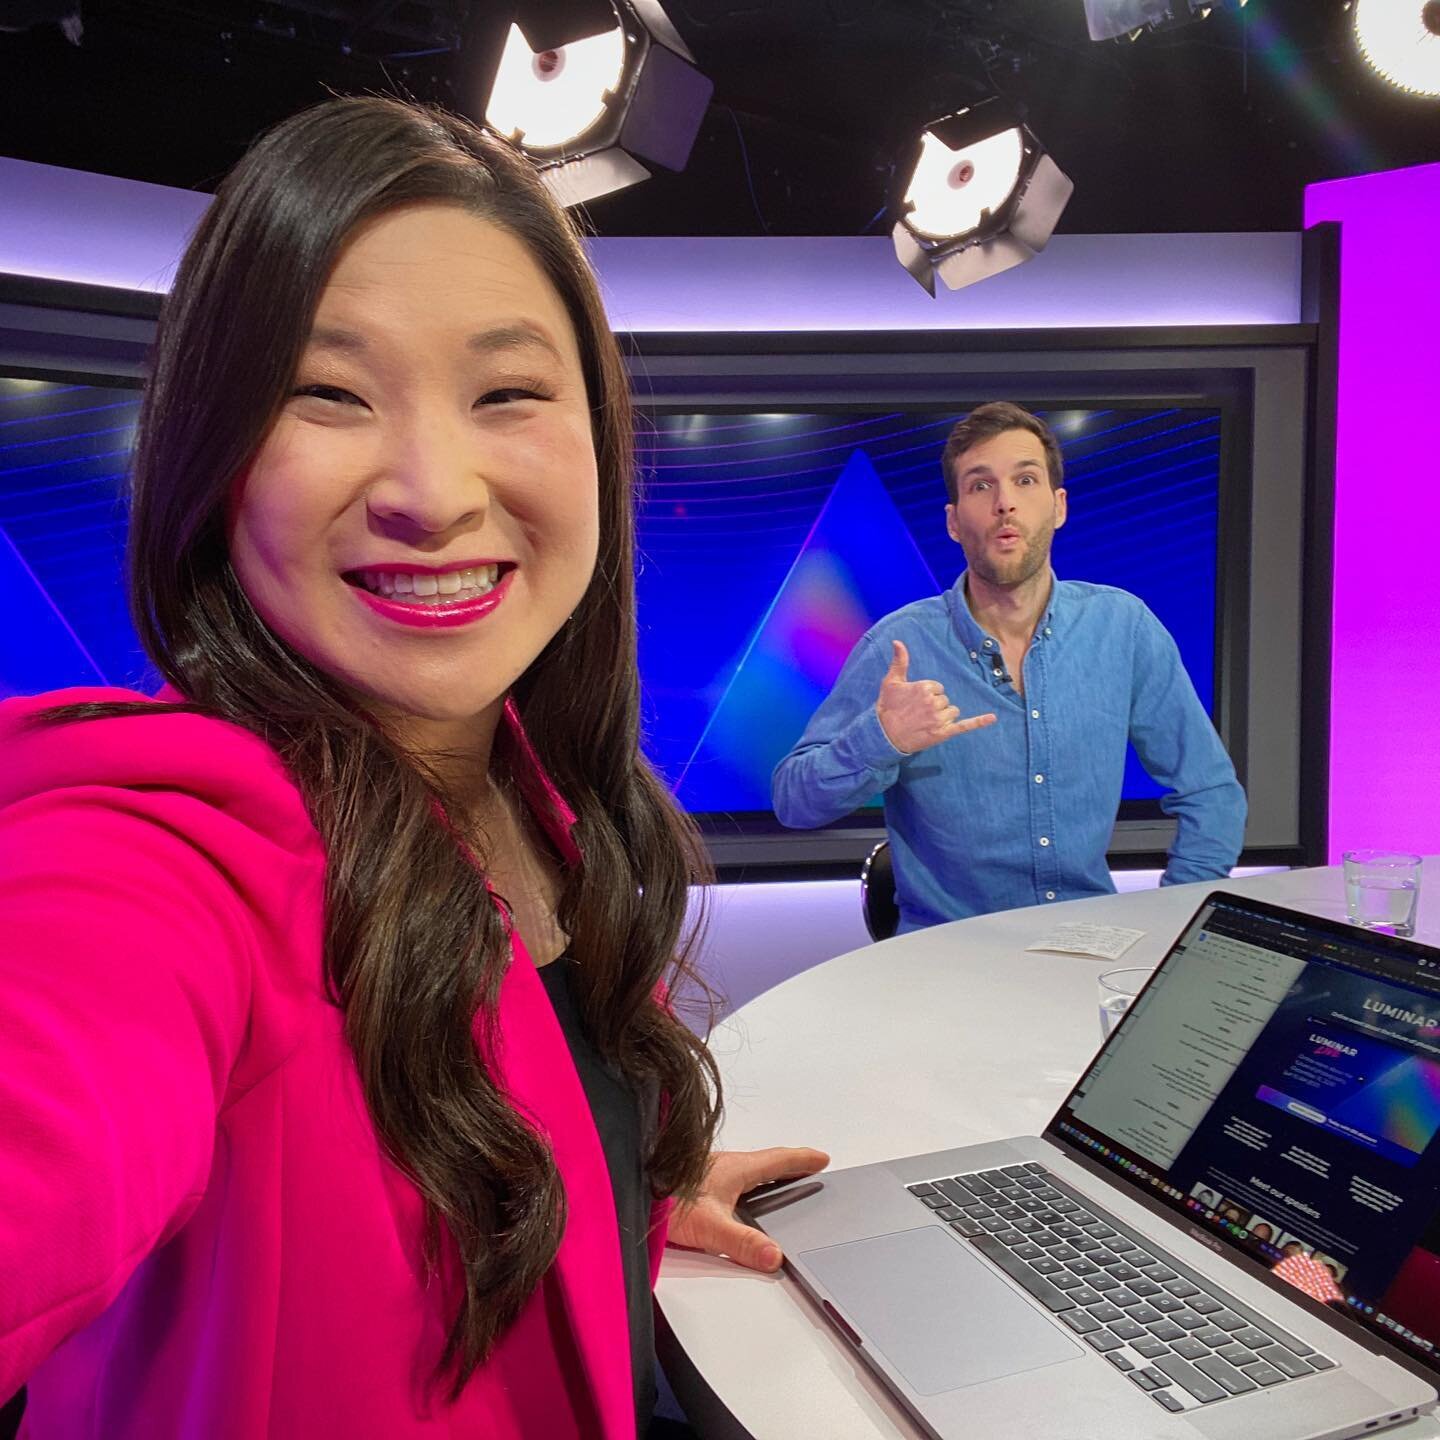 Had a blast working the anchor desk with @pierretlambert last week! 🎥🎤💄 Honored to report on breaking news about Luminar AI photo editing software, and see how easy it is to edit and enhance your photos! Wow! #luminarlive 📸 #breakingnews

Luminar